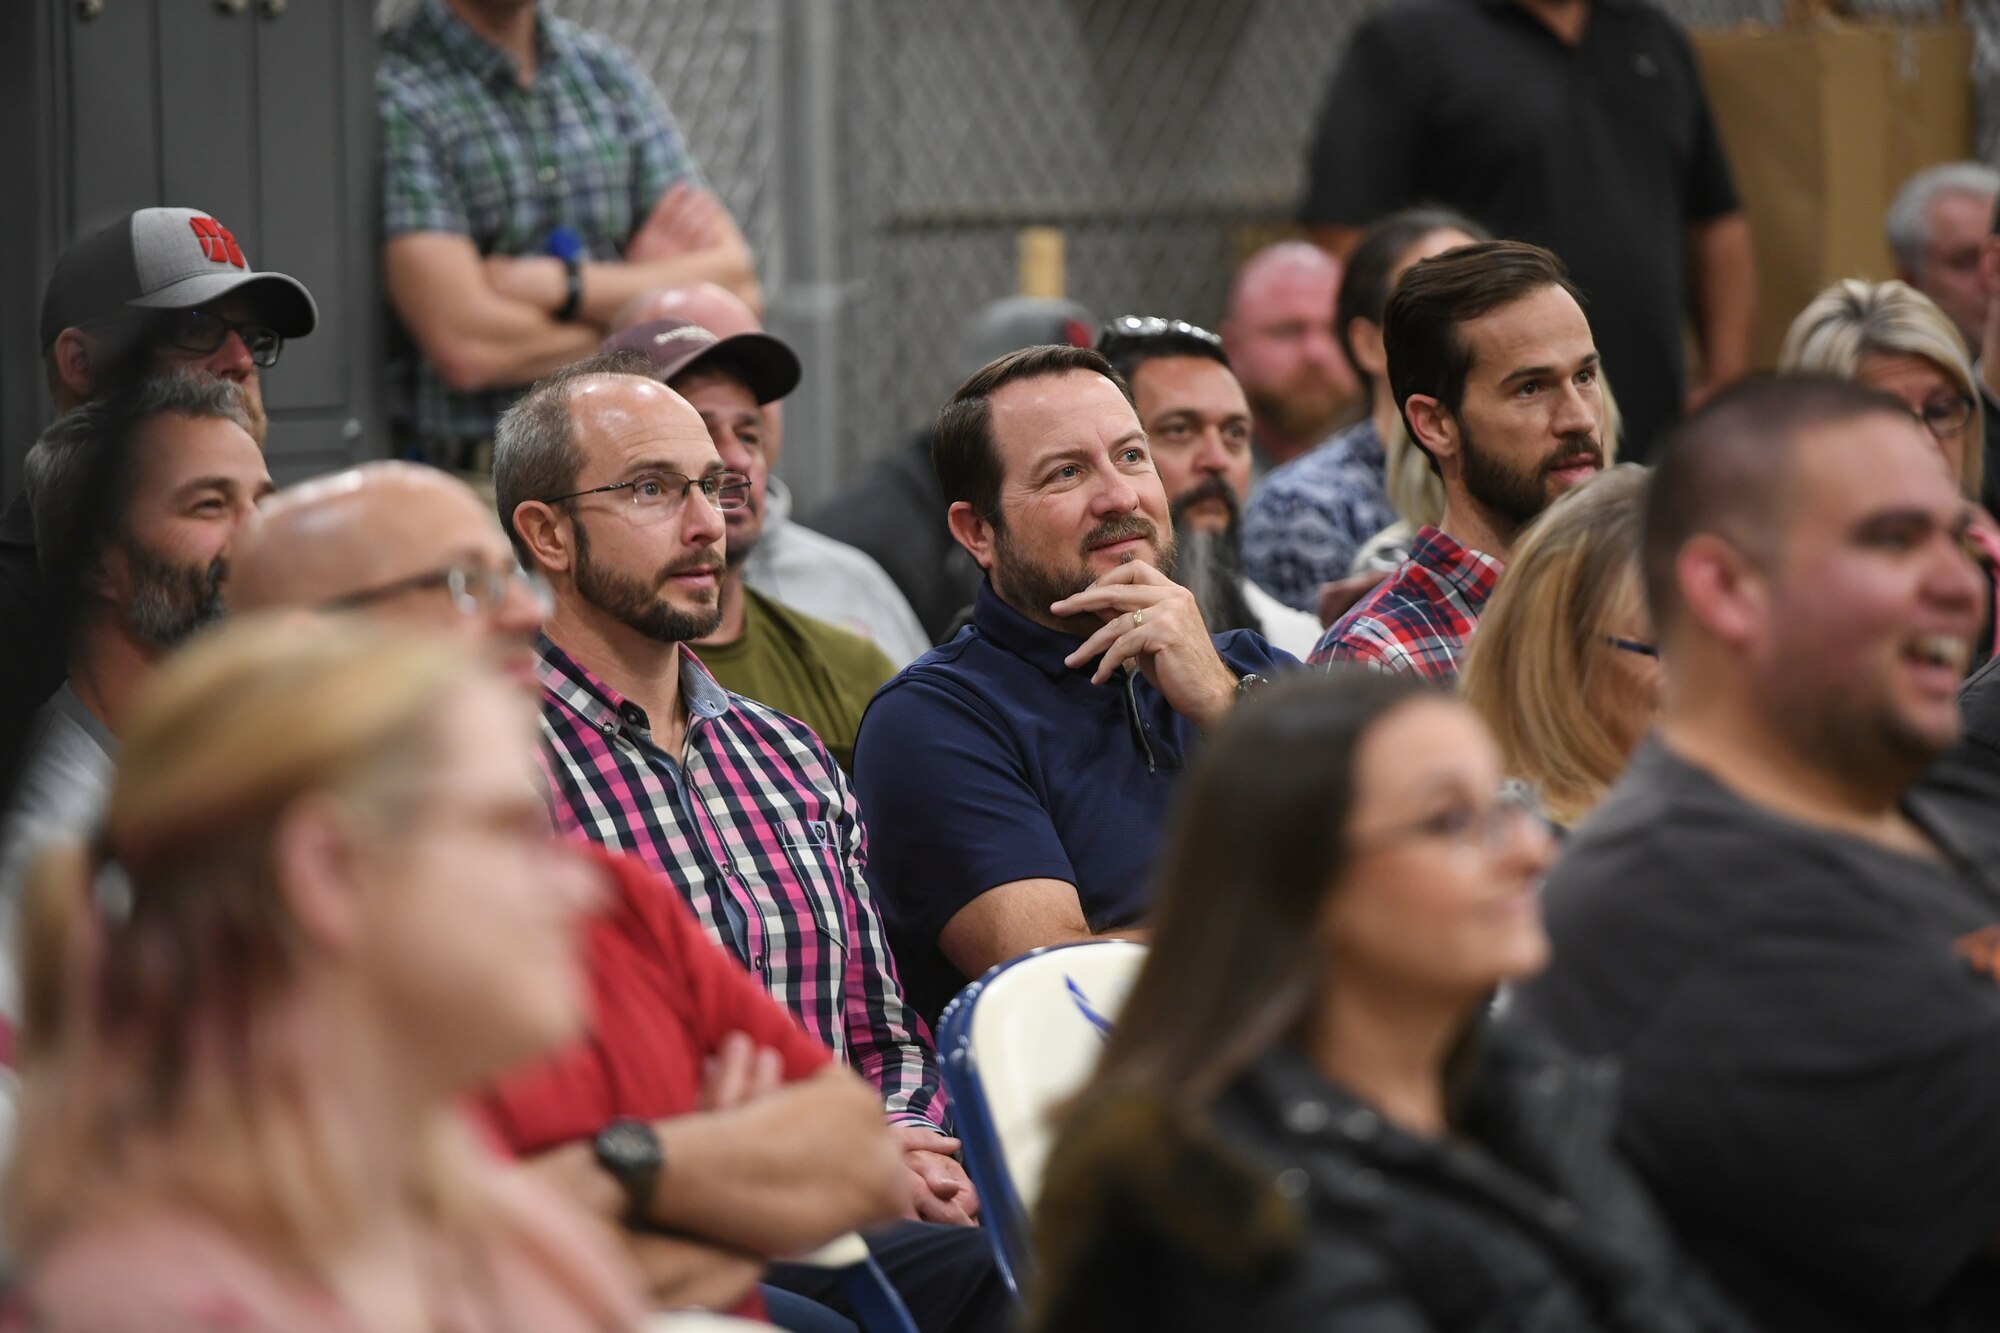 Audience members react during the TEDx salon event held at Hill Air Force Base, Utah Oct. 17, 2019. Three speakers from the around the base gave talks of inspiration and calls to action. (U.S. Air Force photo by Cynthia Griggs)